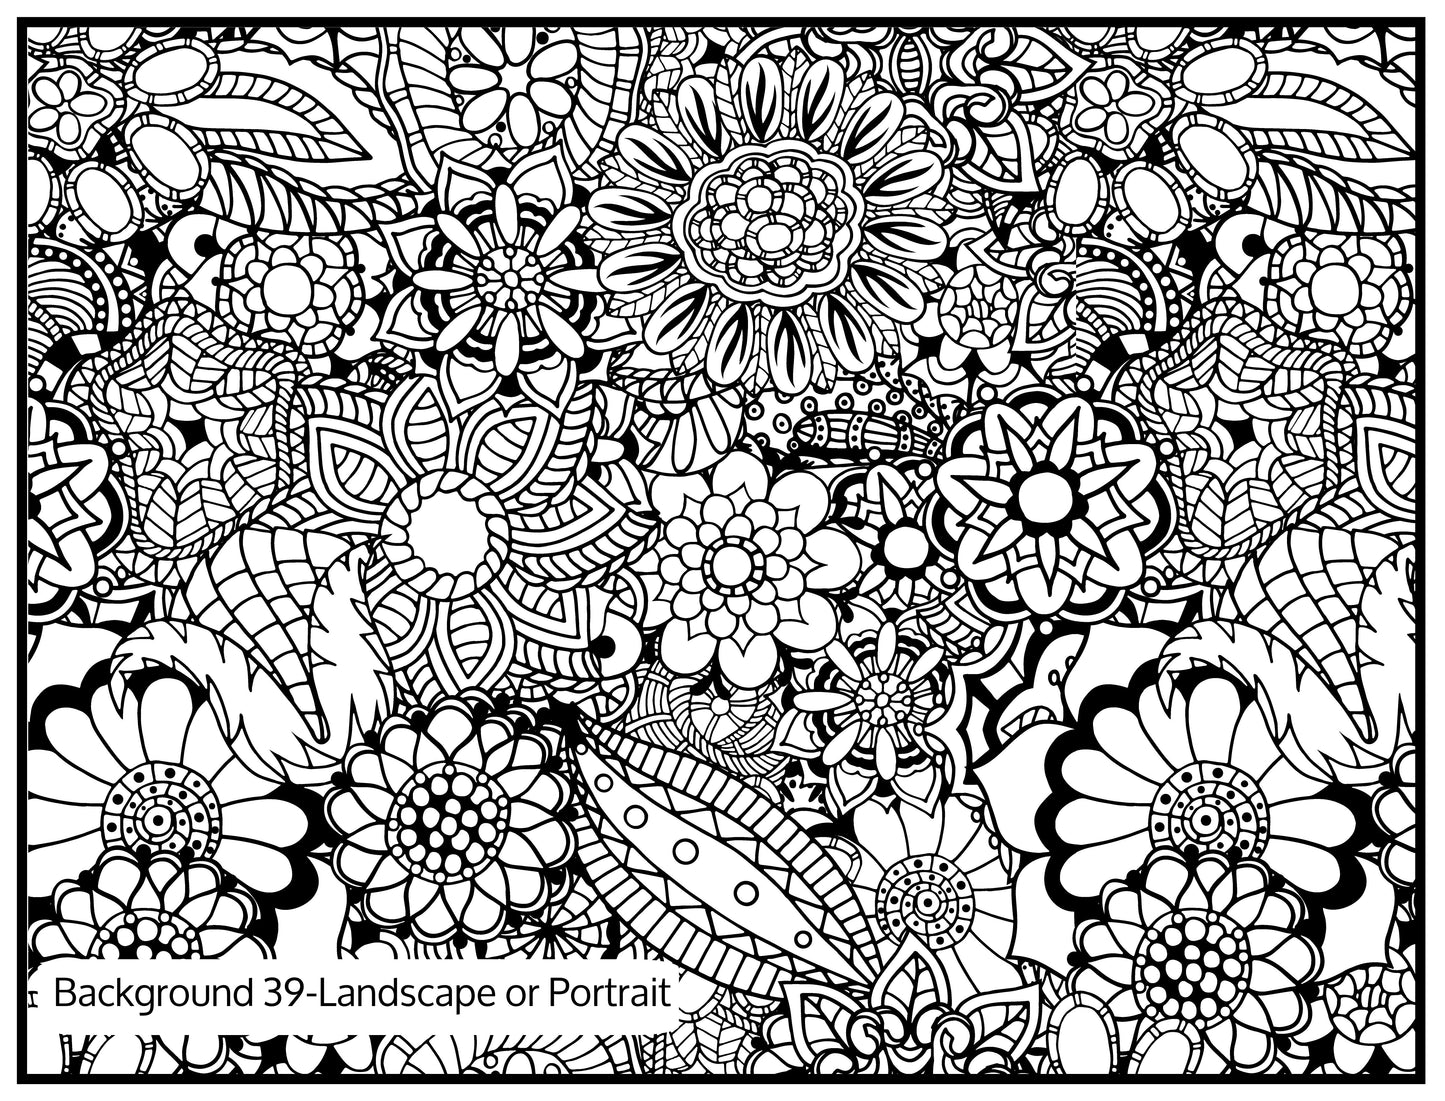 Background 39 Custom Personalized Giant Coloring Poster 46"x60"